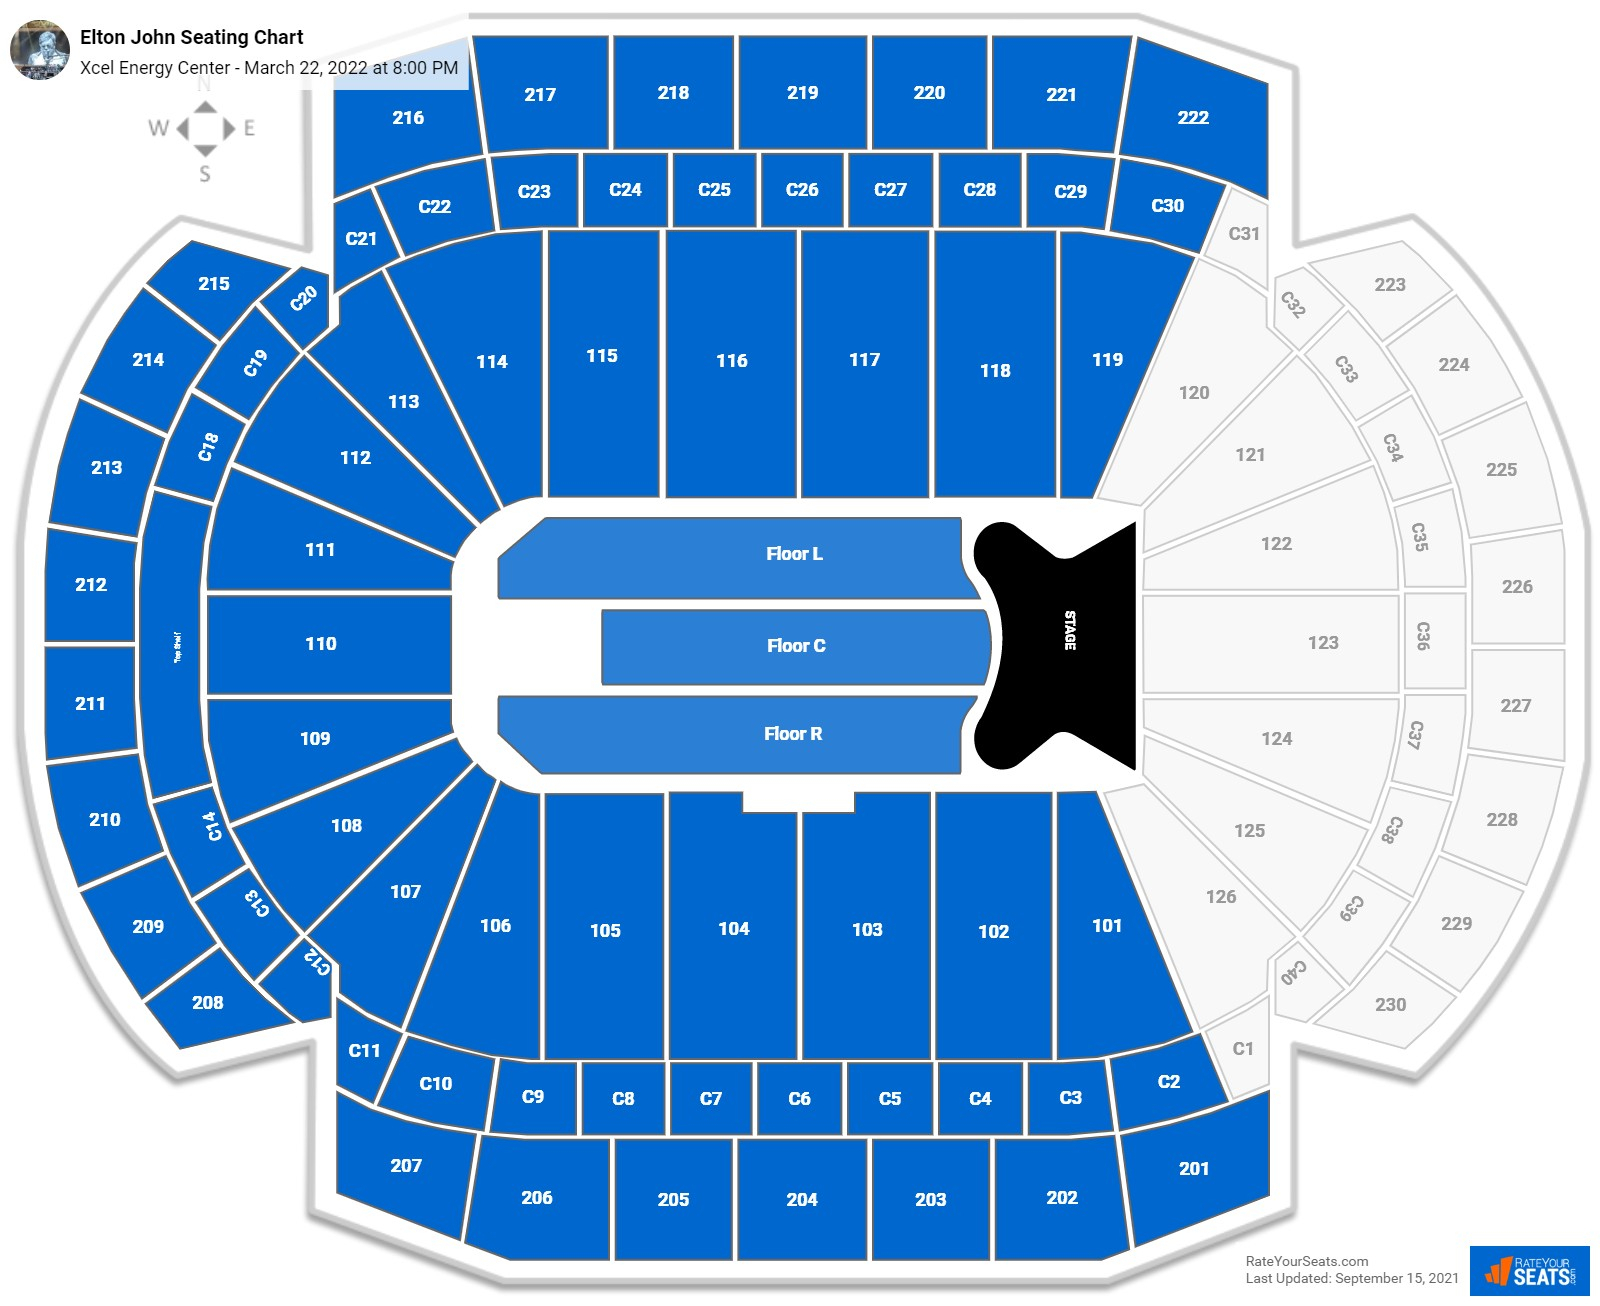 Xcel Energy Center Seating Charts For Concerts  Rateyourseats inside Xcel Energy Center Event Calendar